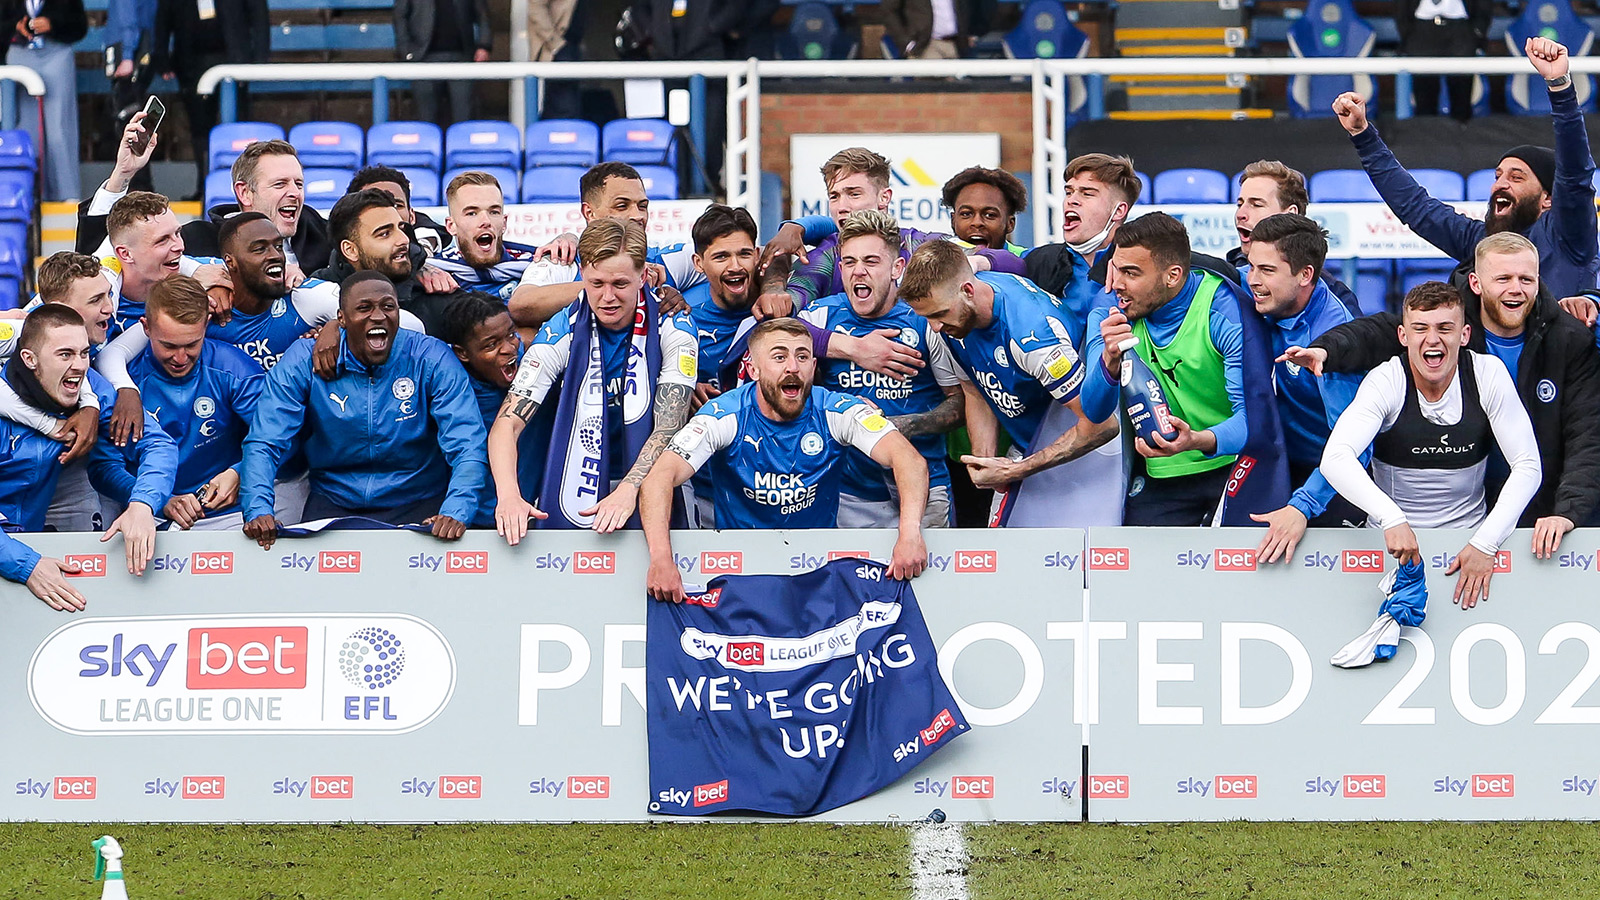 1st May '21 | Promotion back to the Sky Bet Championship, let the celebrations commence!